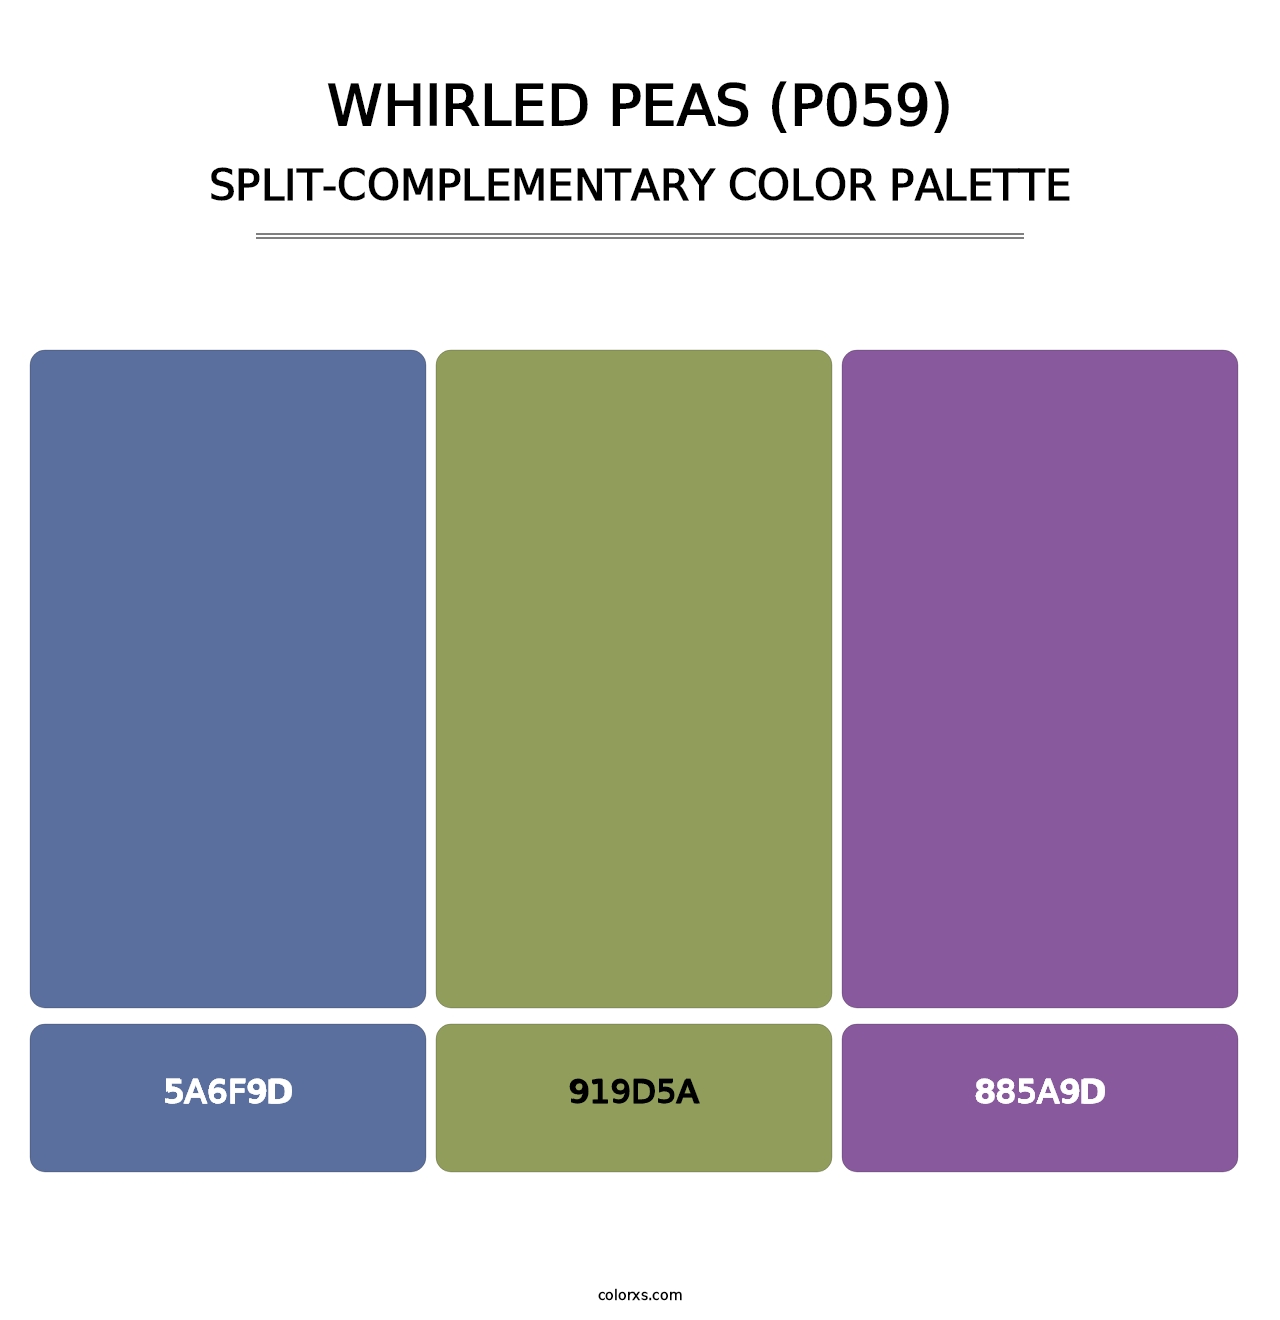 Whirled Peas (P059) - Split-Complementary Color Palette